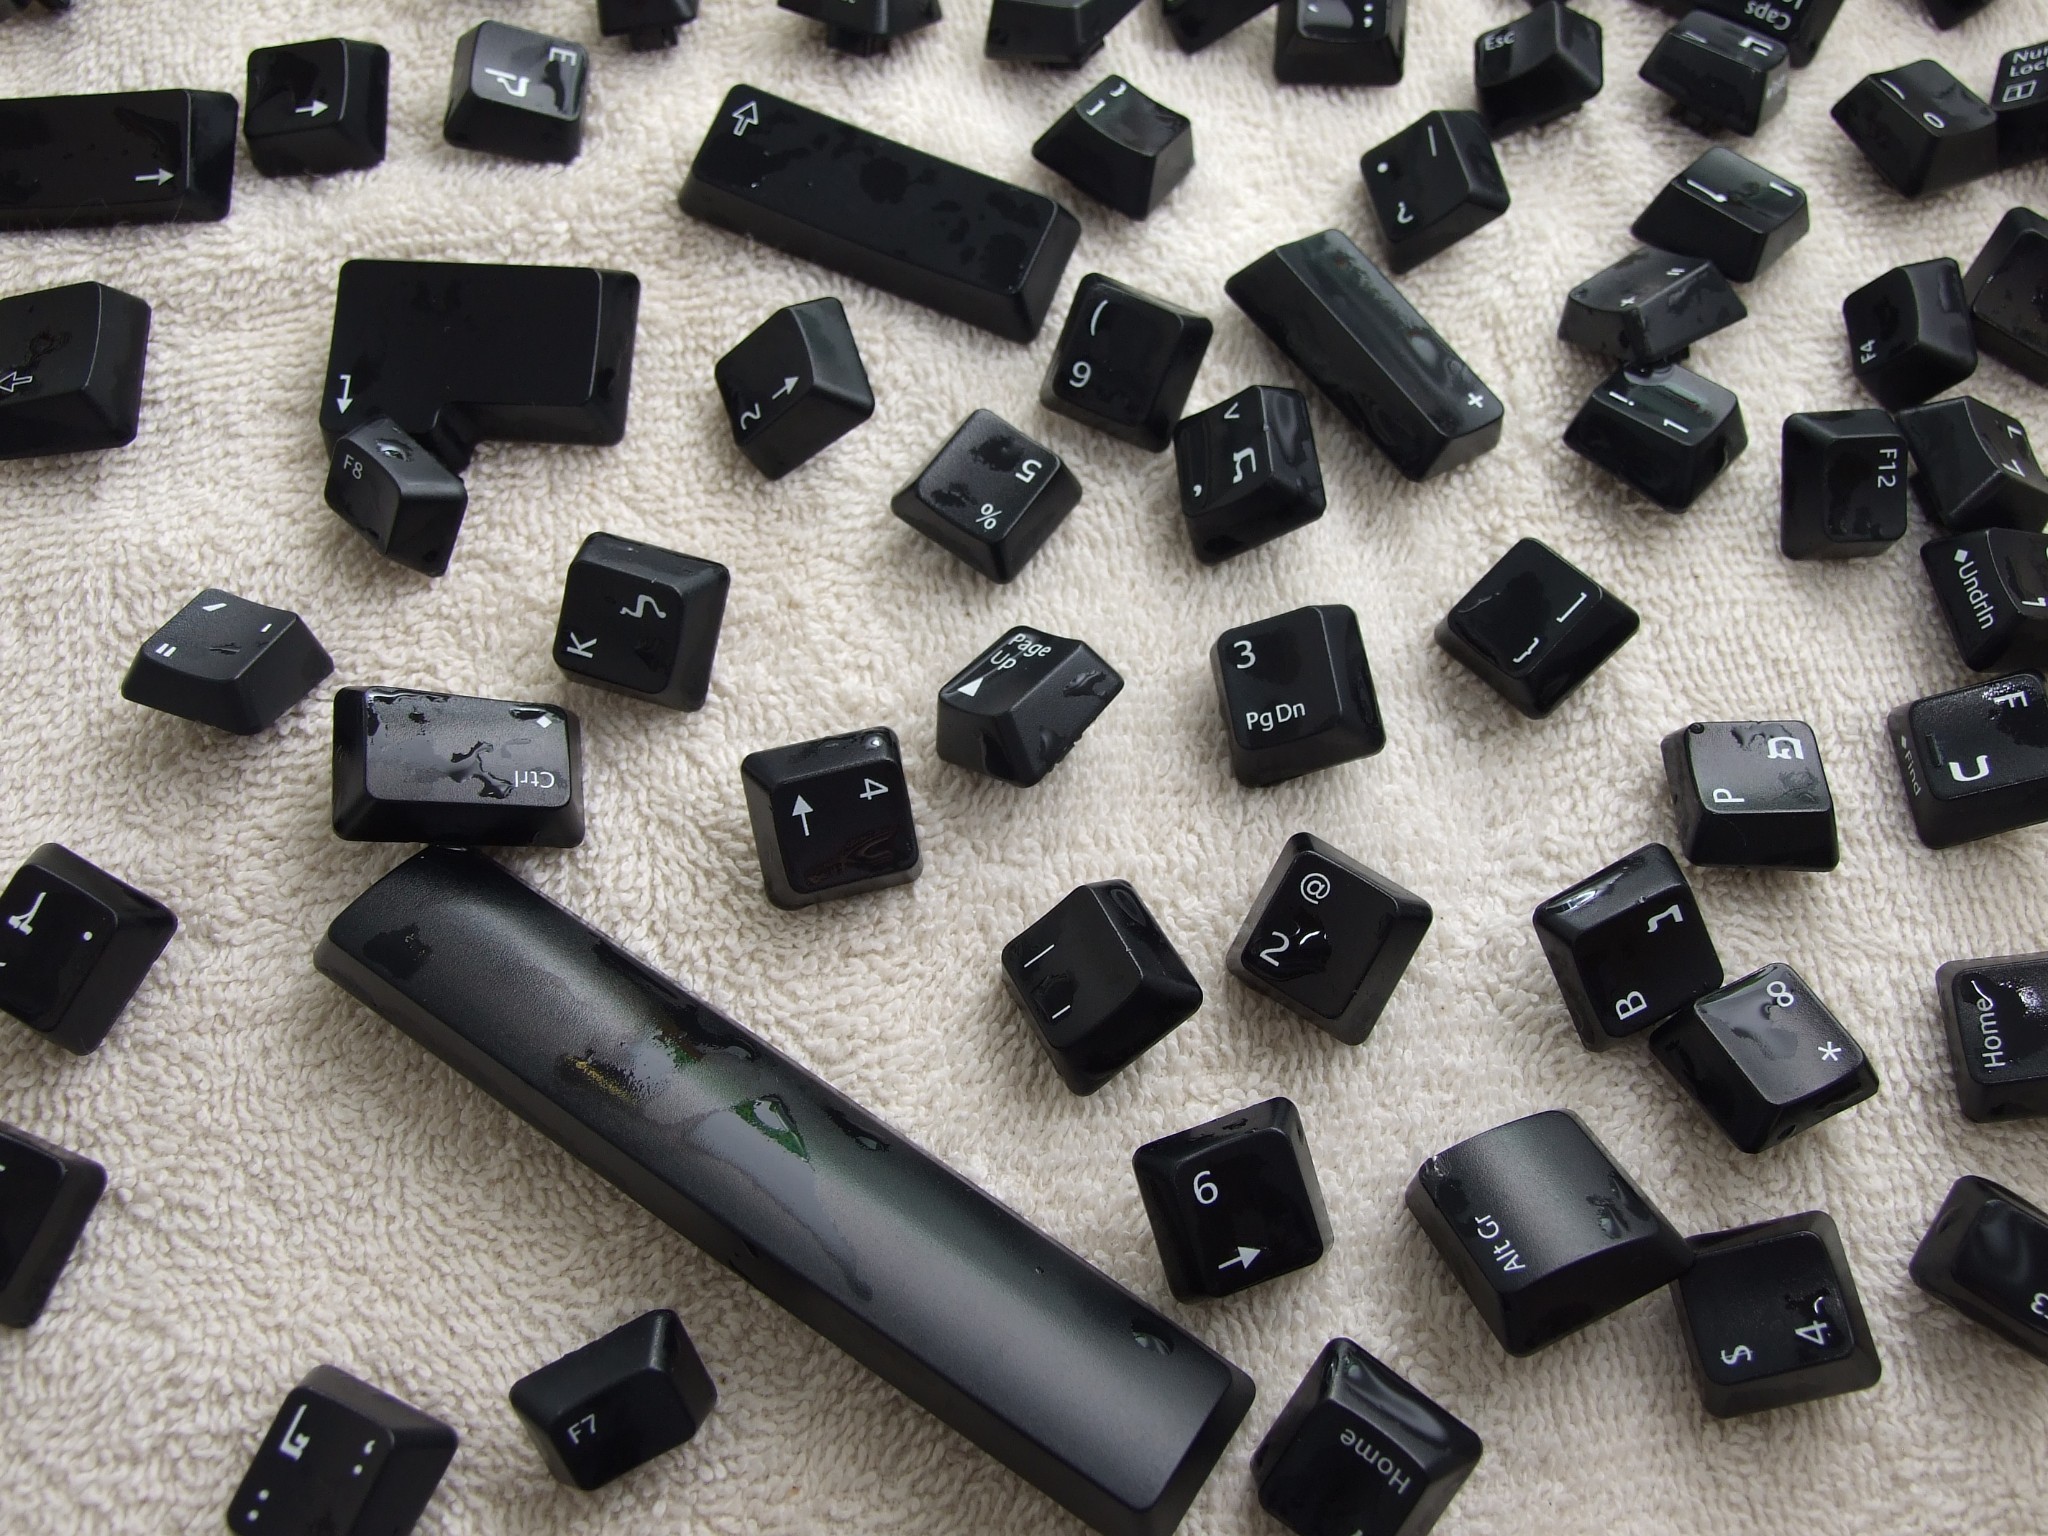 Keyboard keys, Black, Buttons, Cleaning, Computer, HQ Photo